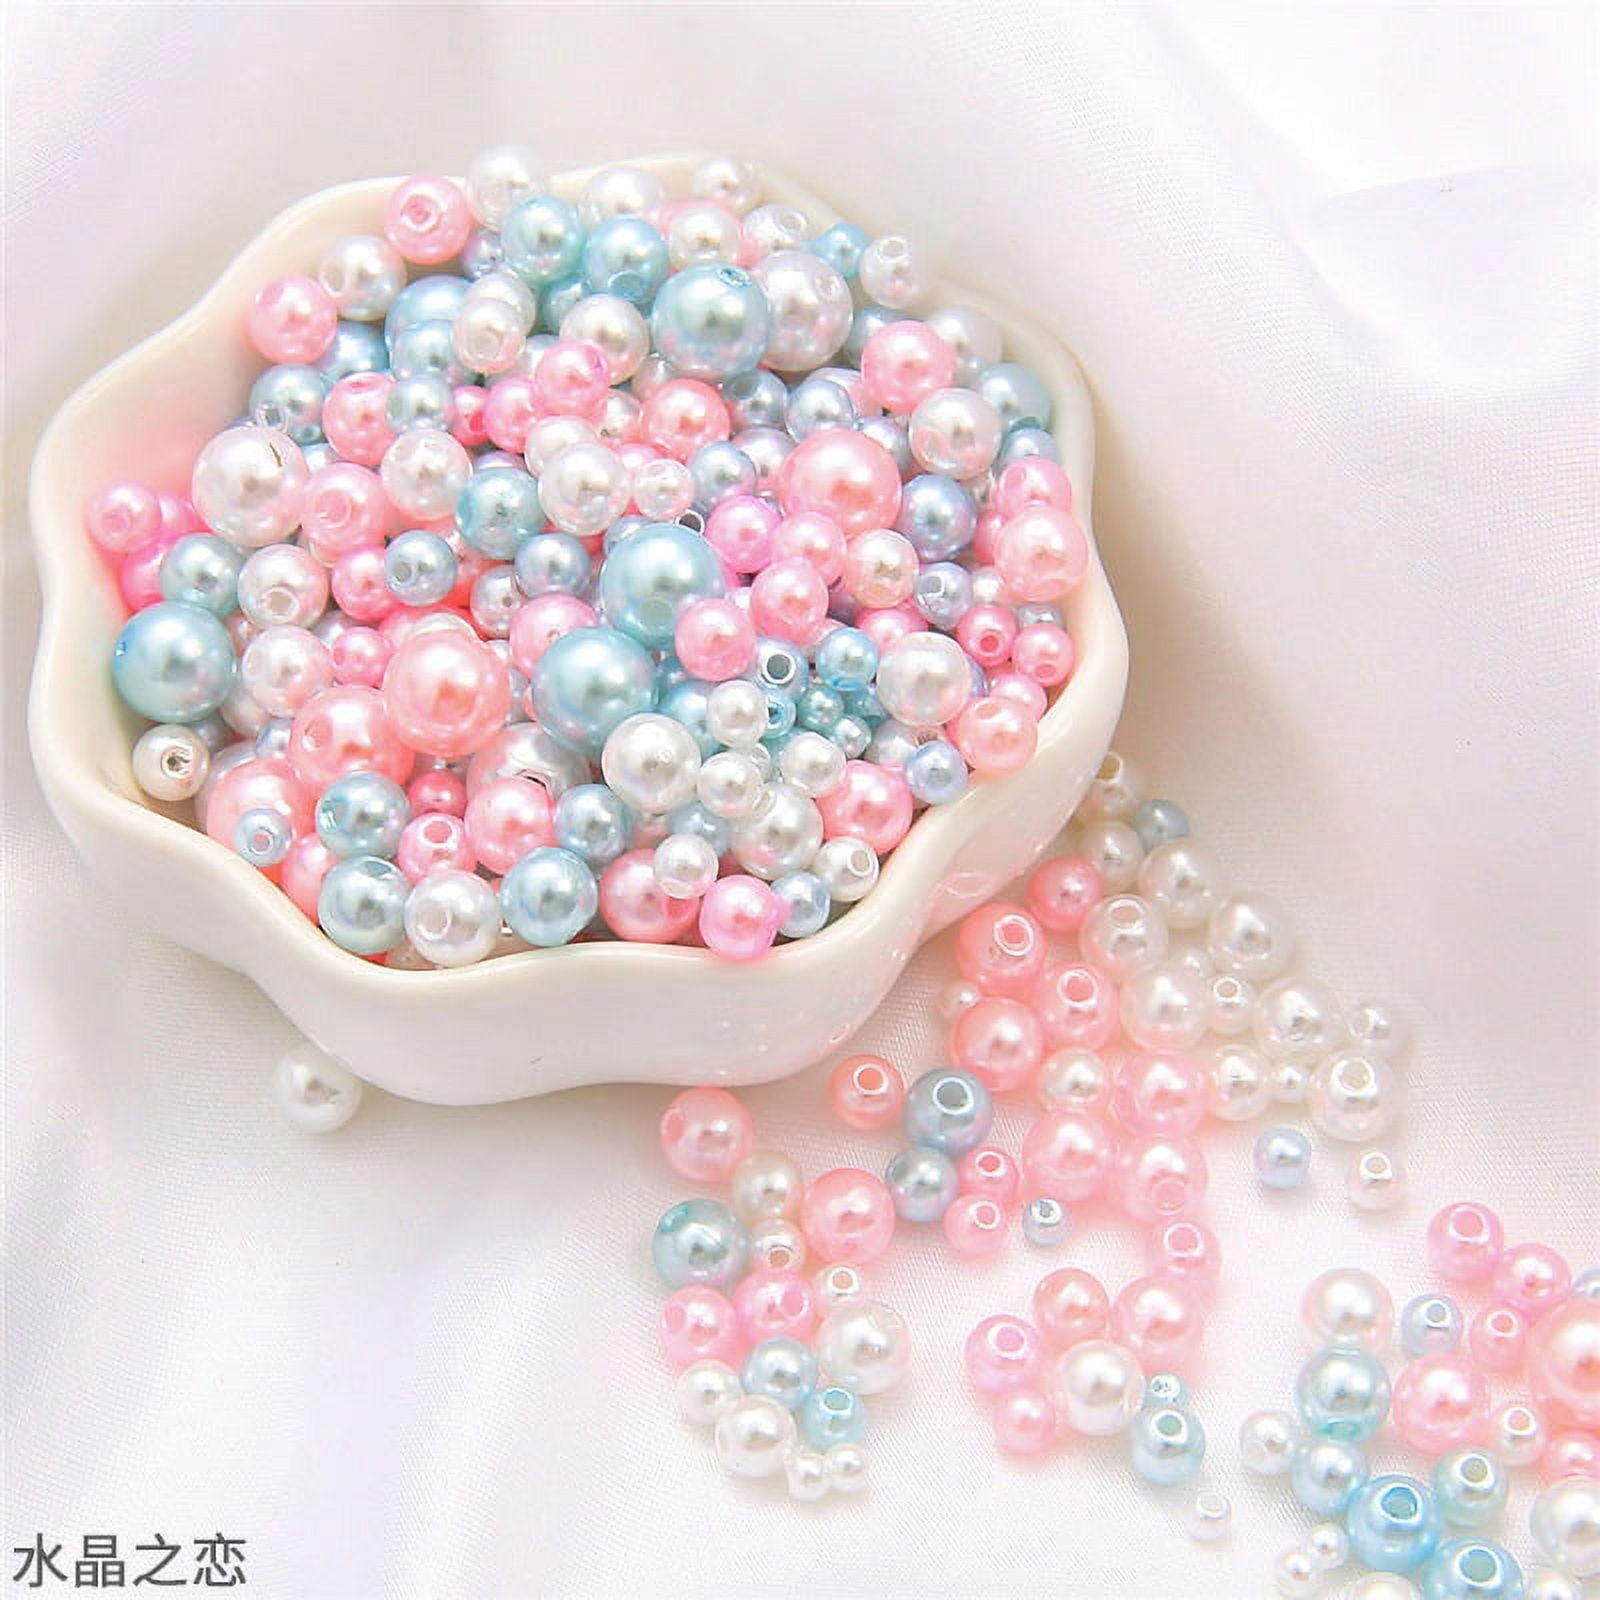  XSEINO Pearl Beads，3200PCS 8mm and 6mm，46 Colors Multicolor Pearl  Beads Loose Pearls for Crafts with Holes for Jewelry Making, Small Pearl  Filler Beads for Crafting Bracelet Necklace Earrings